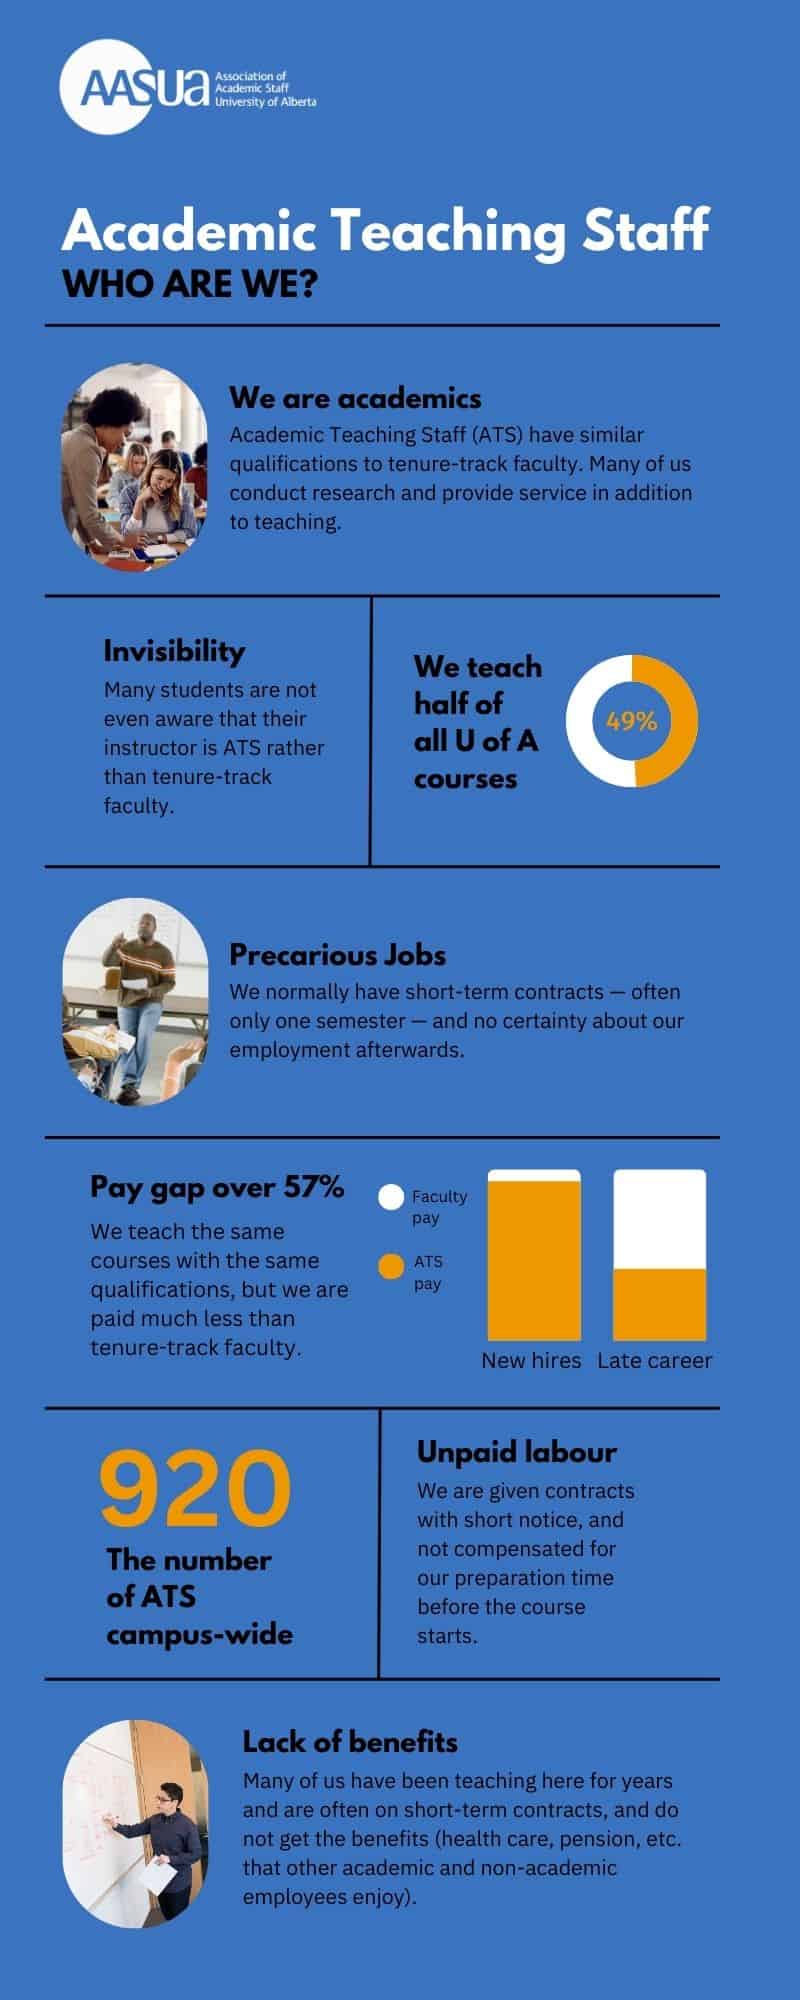 An infographic with facts about Academic Teaching staff, including the fact that they teach the same courses with the same qualifications but are maid much less, with a pay gap over 57 per cent.